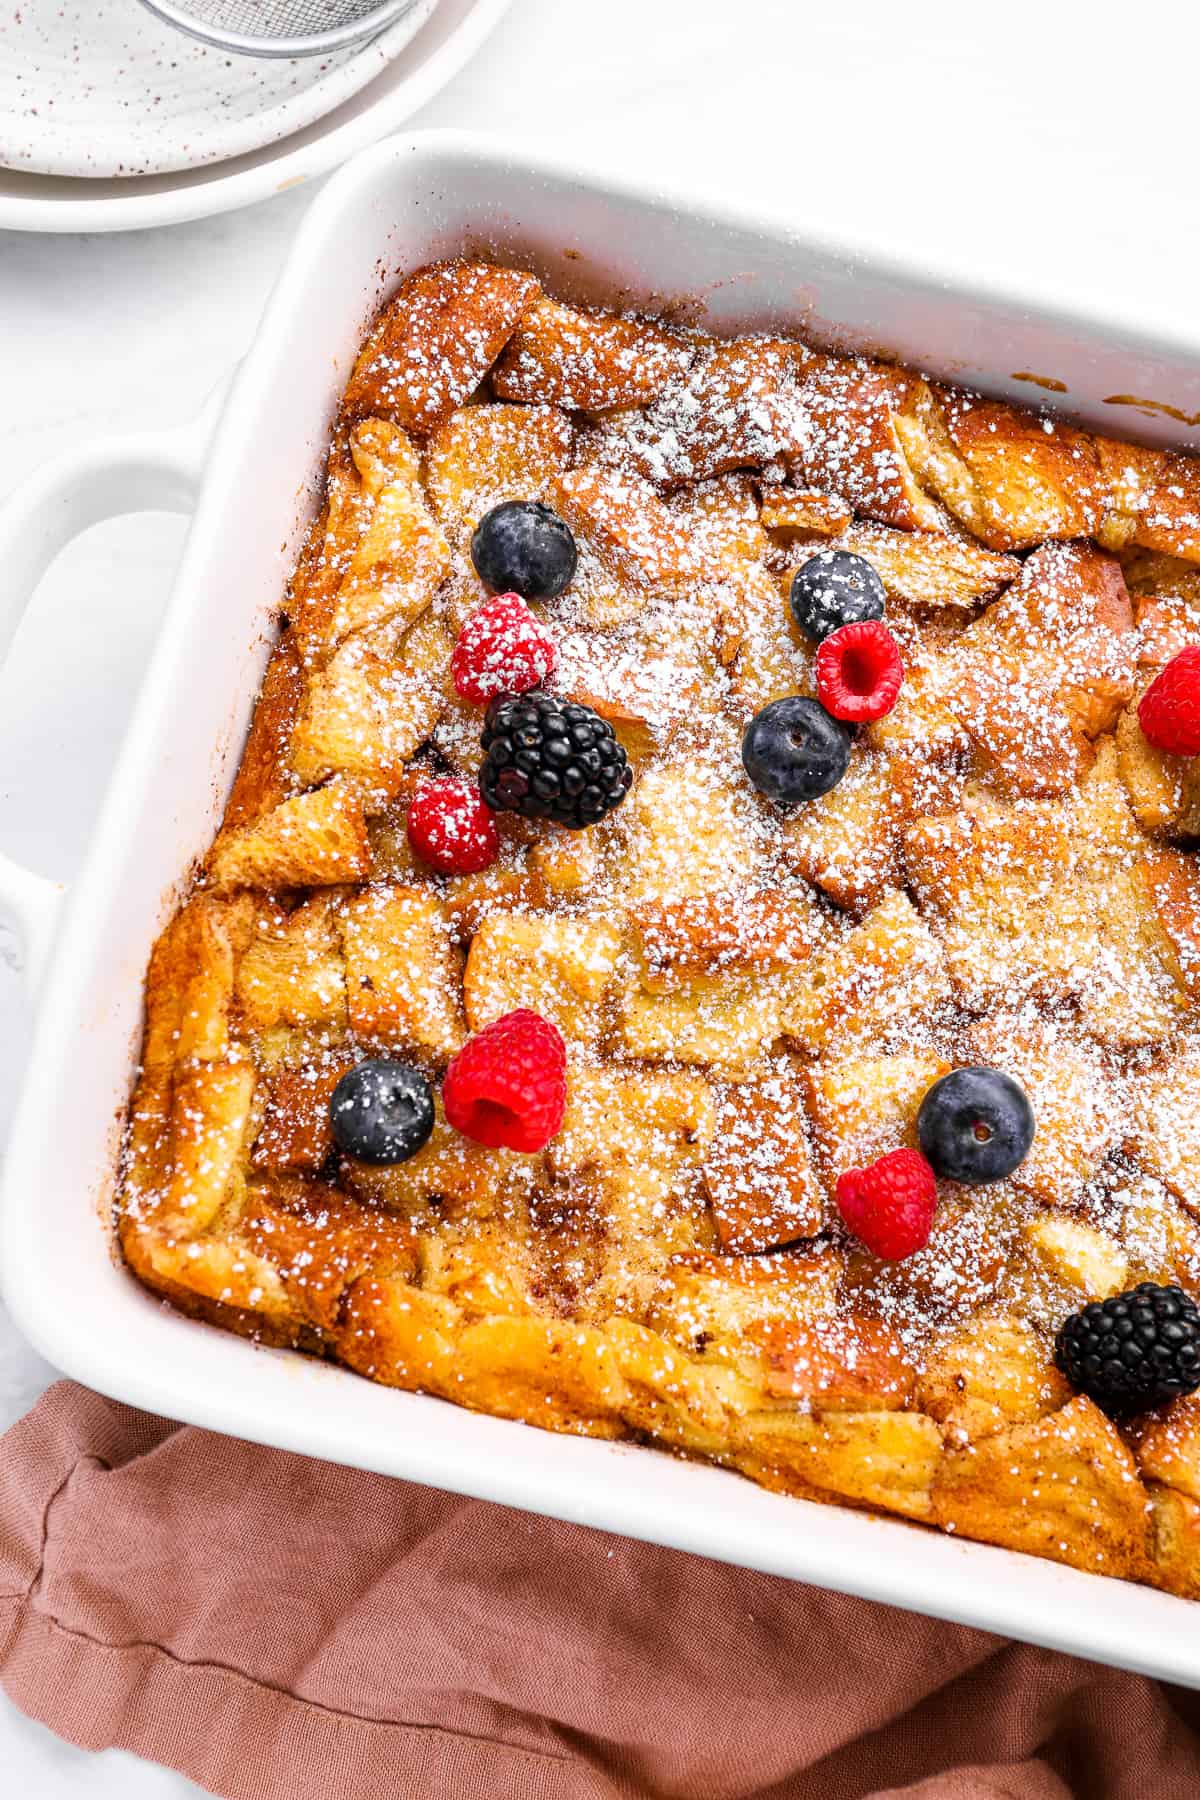 bread pudding in a white baking pan with powdered sugar and berries.